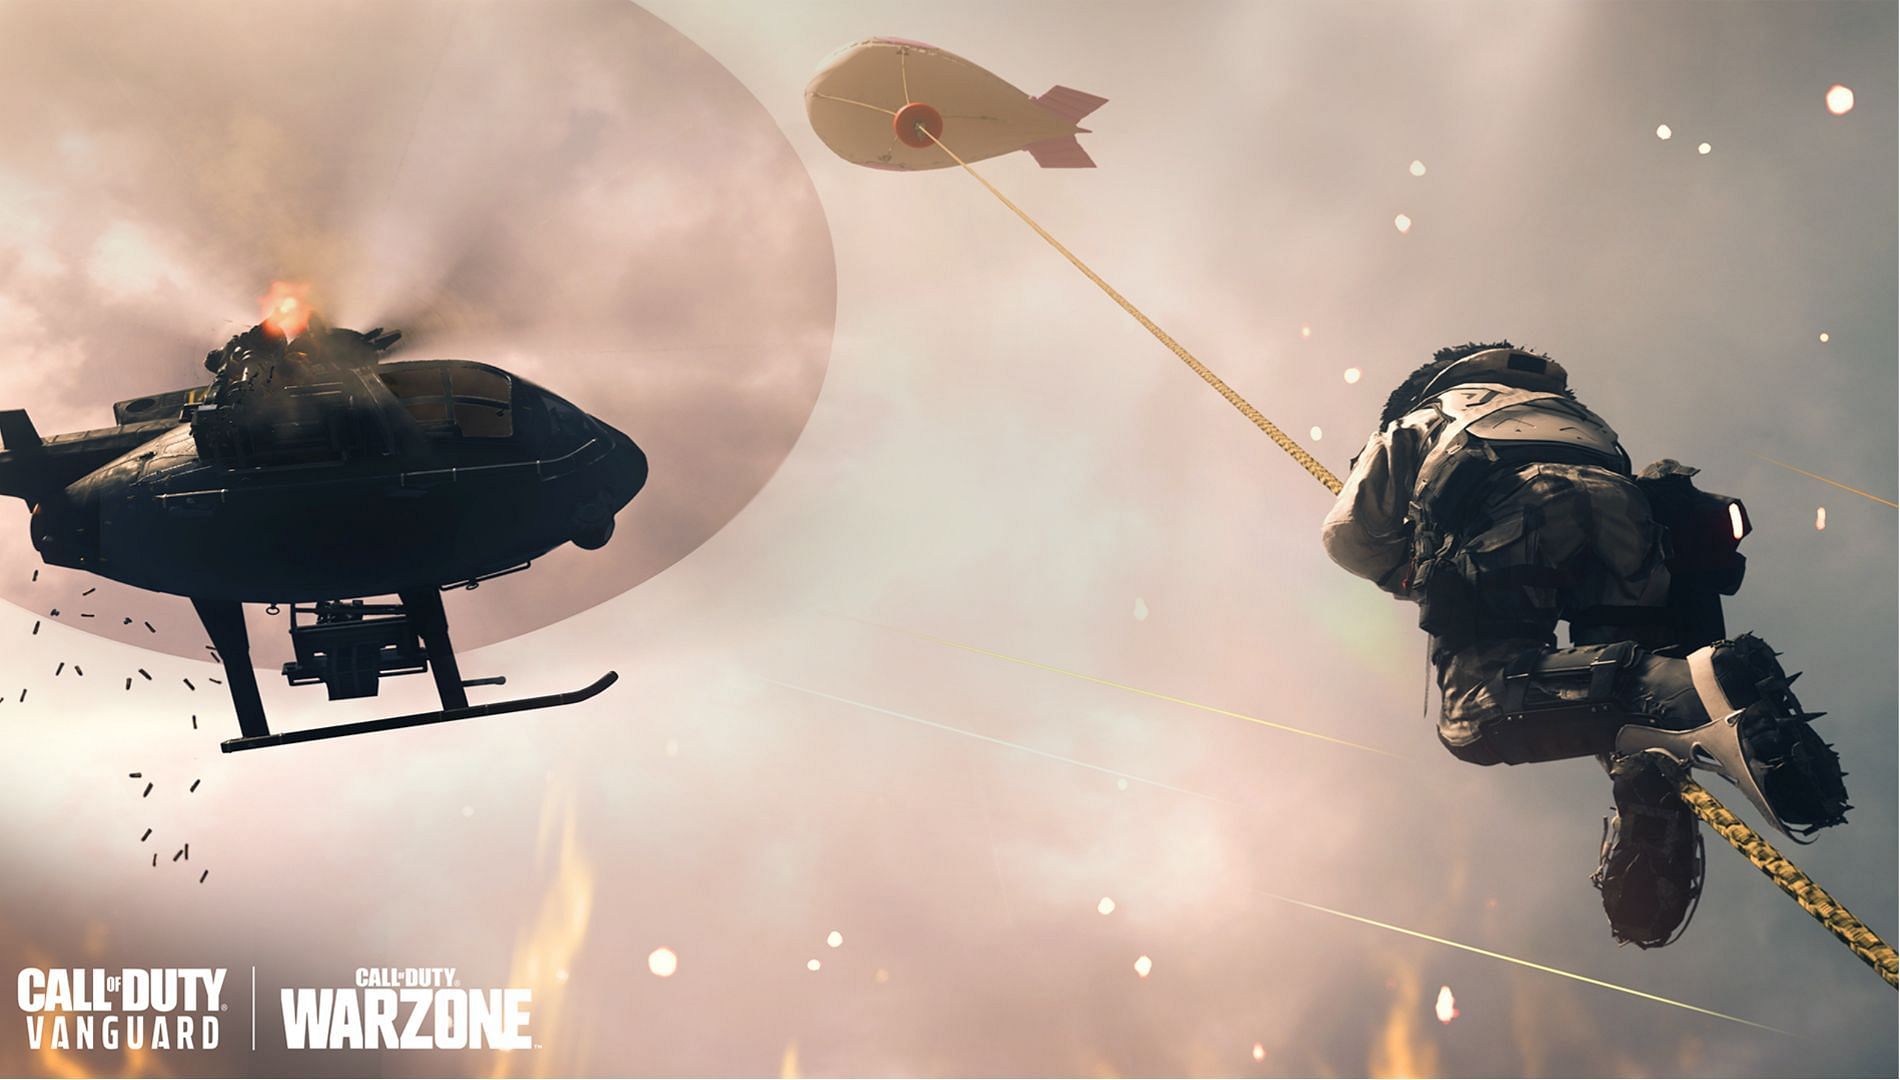 Portable redeployment balloons Call of Duty Warzone Season 4 Reloaded (Image via Activision)